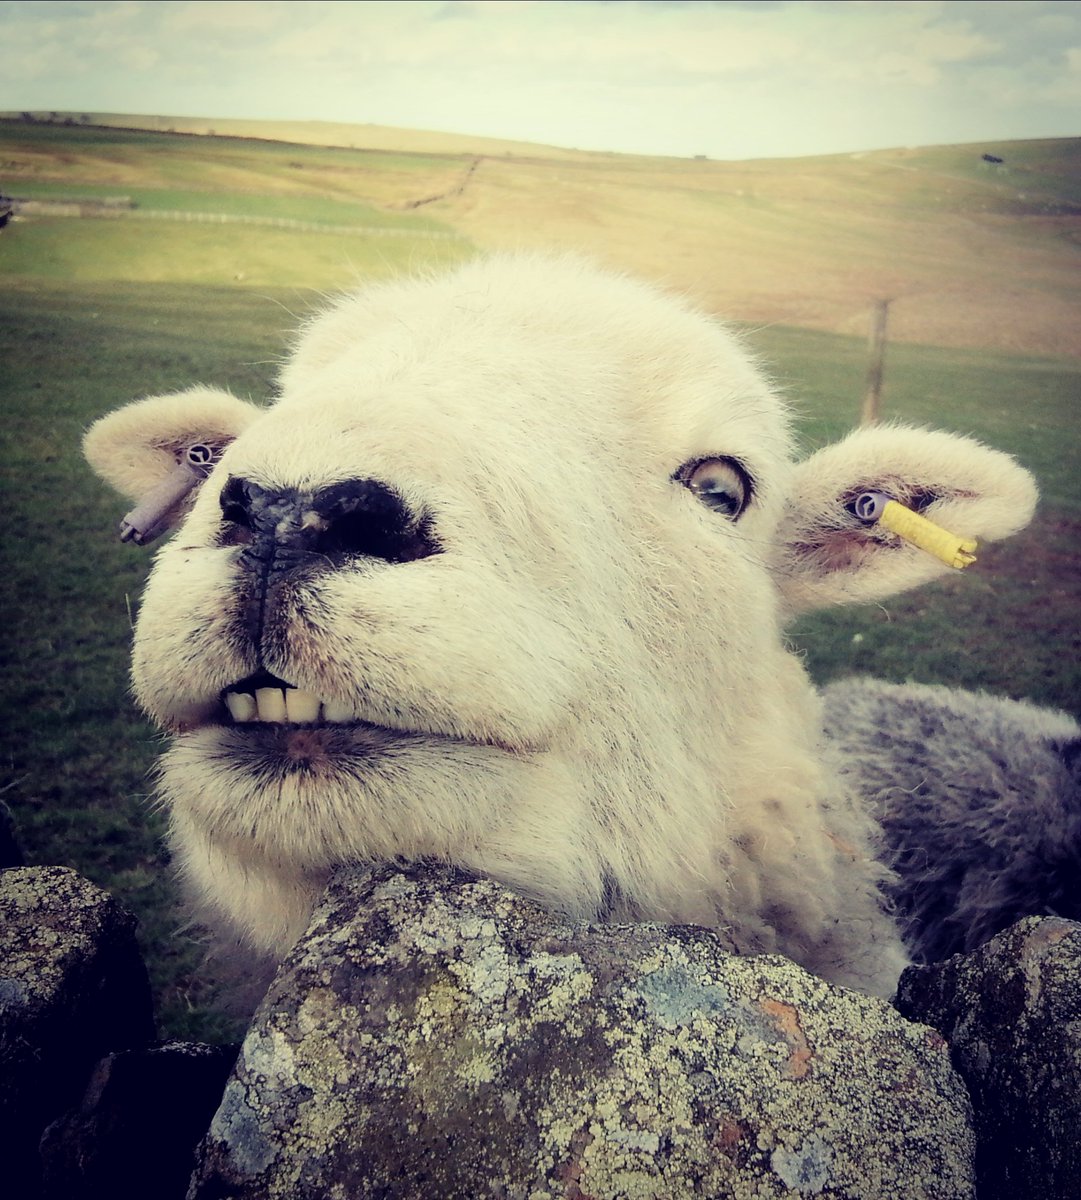 If Dotty doesn't make you smile, I don't know what else will...
#herdwicks #sheep #hillfarm #hillfarm #peakdistrict #Staffordshiremoorlands